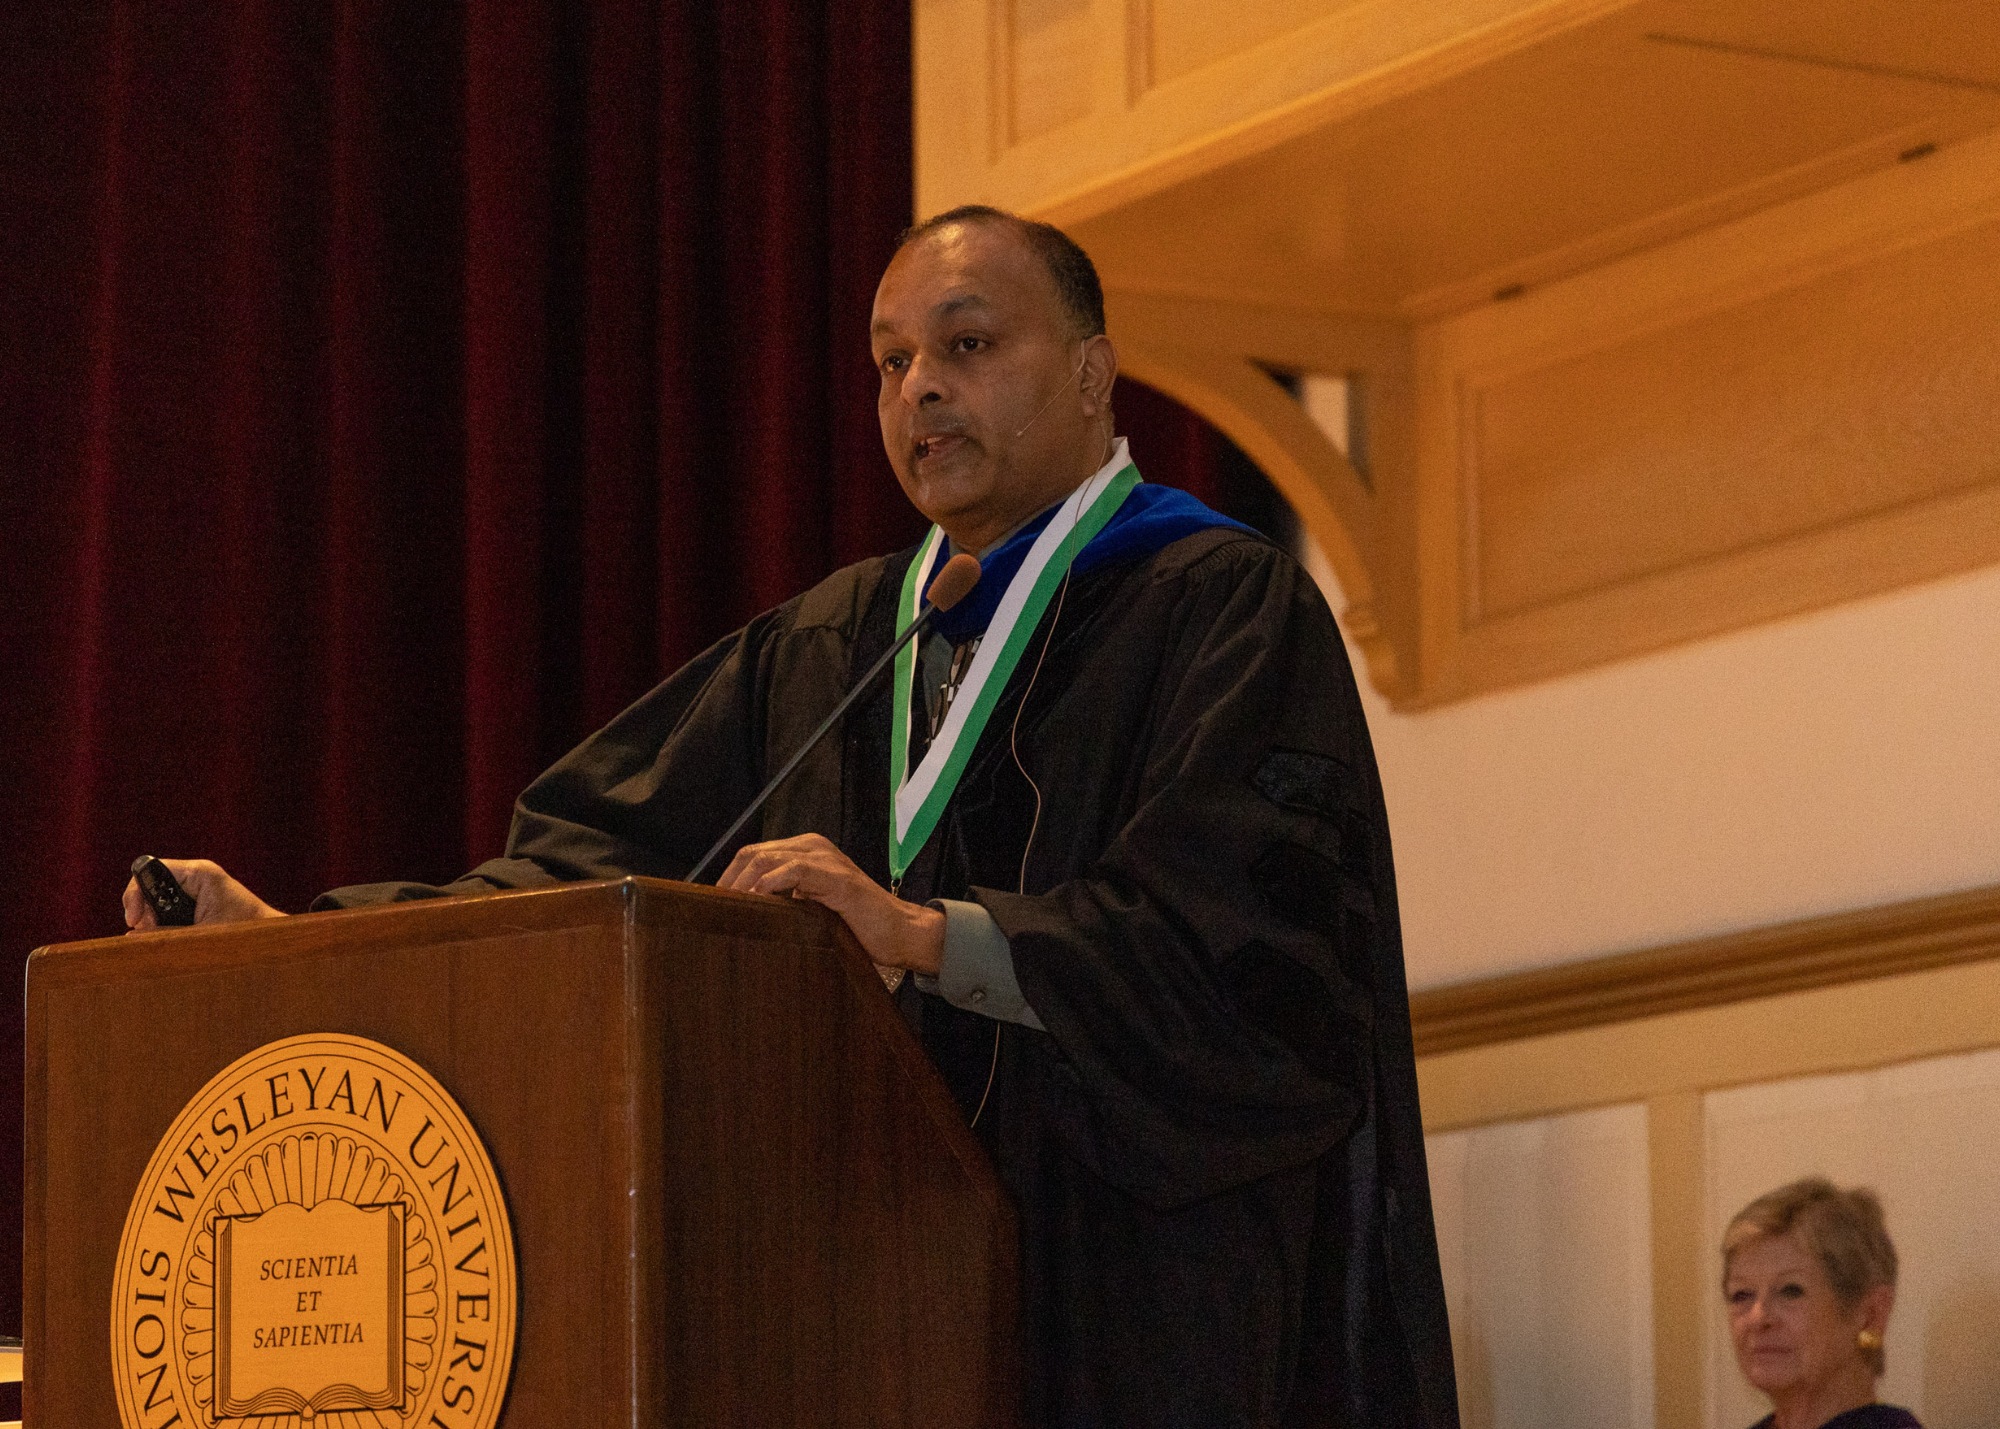 Ram Mohan presents from podium during Kemp Award ceremony